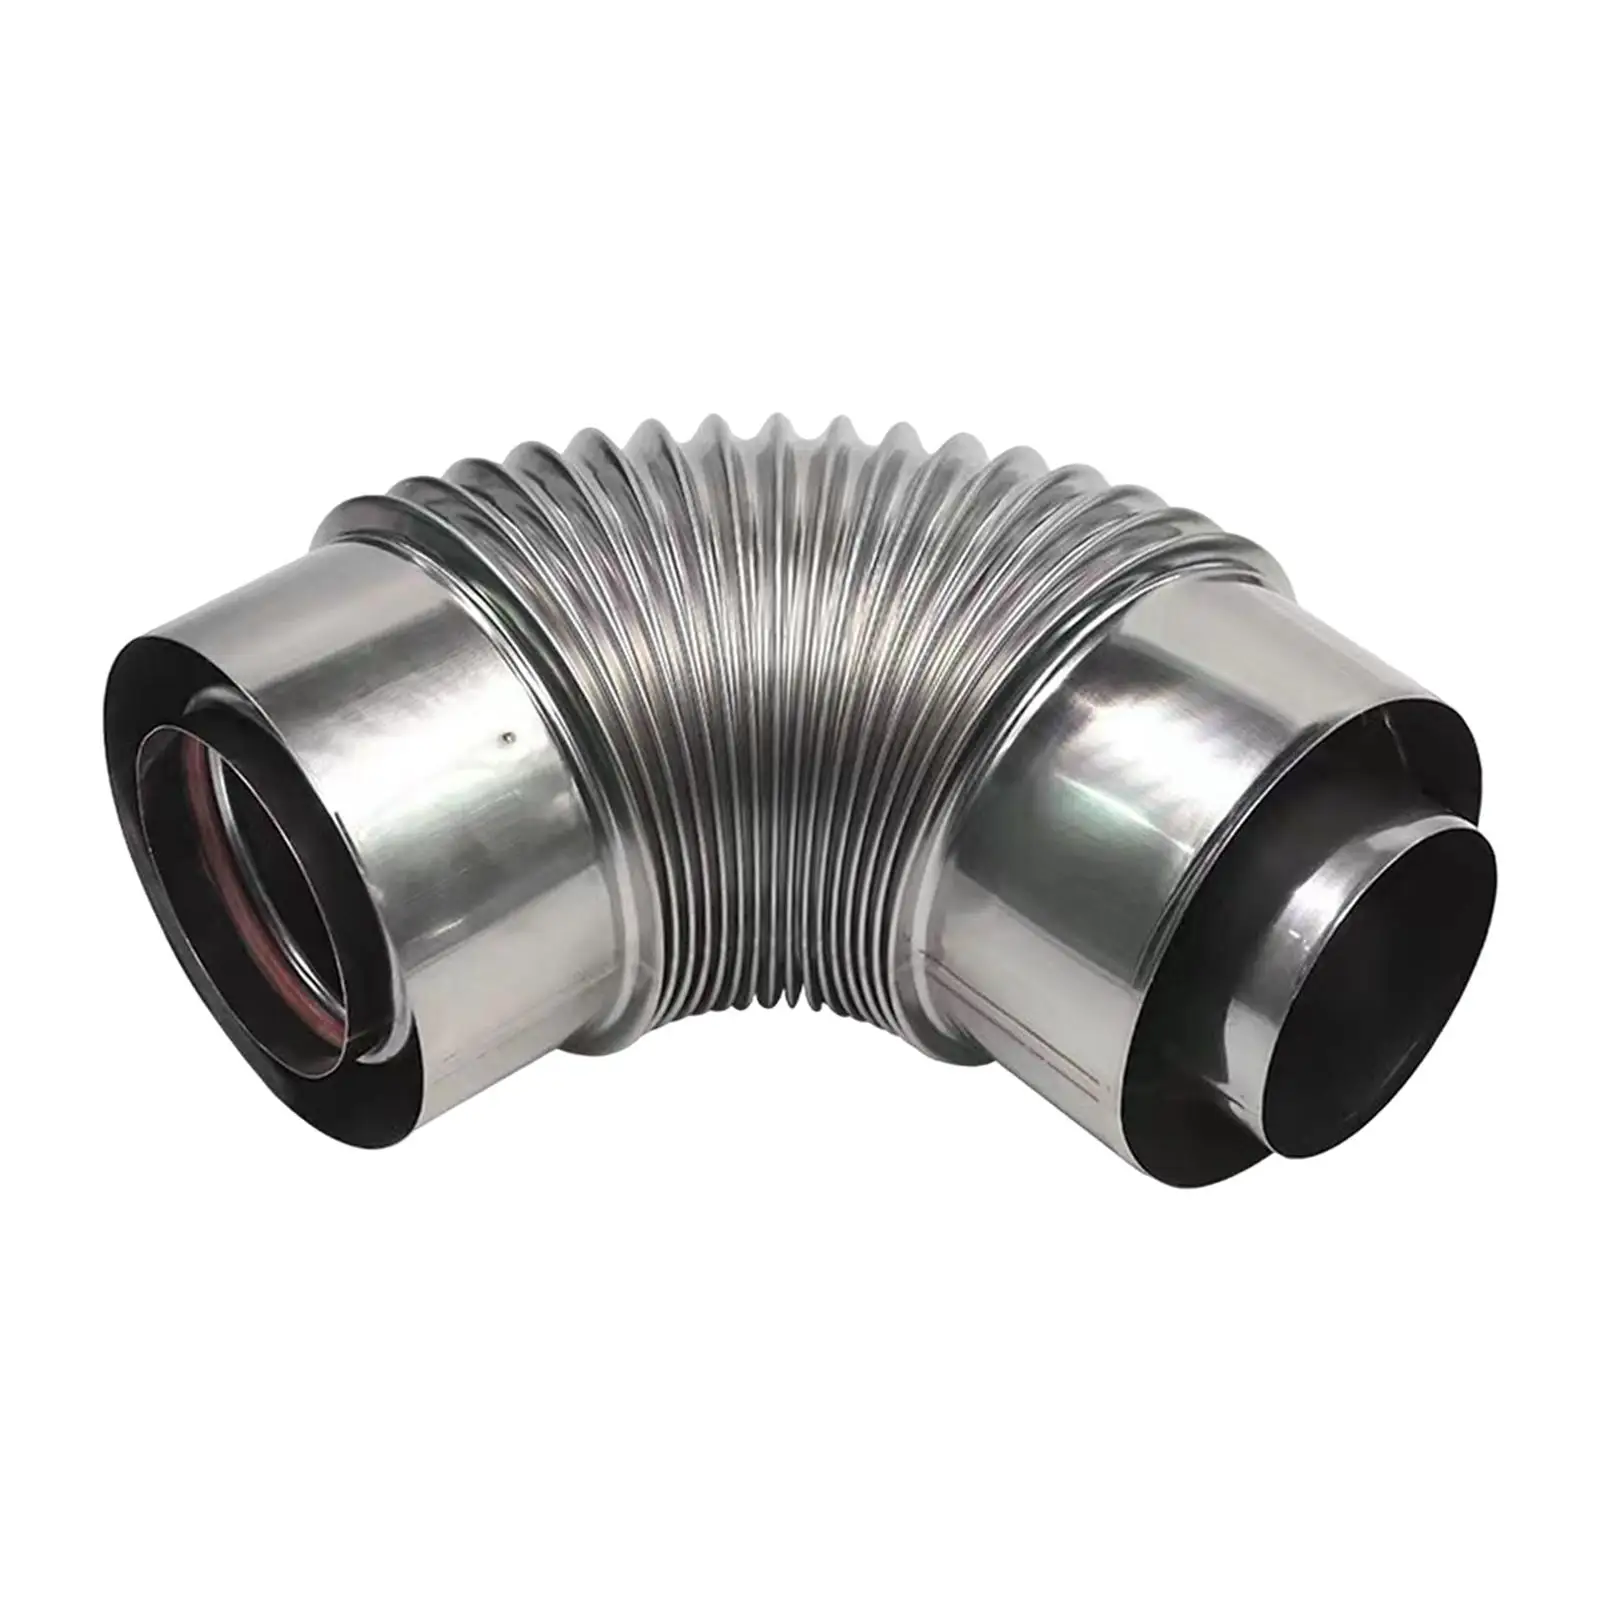 Stainless Steel Elbow Pipe Elbow Connector Flue Adapter Tube Chimney Flue for Heater Greenhouse Bathroom Farmhouse Kitchen